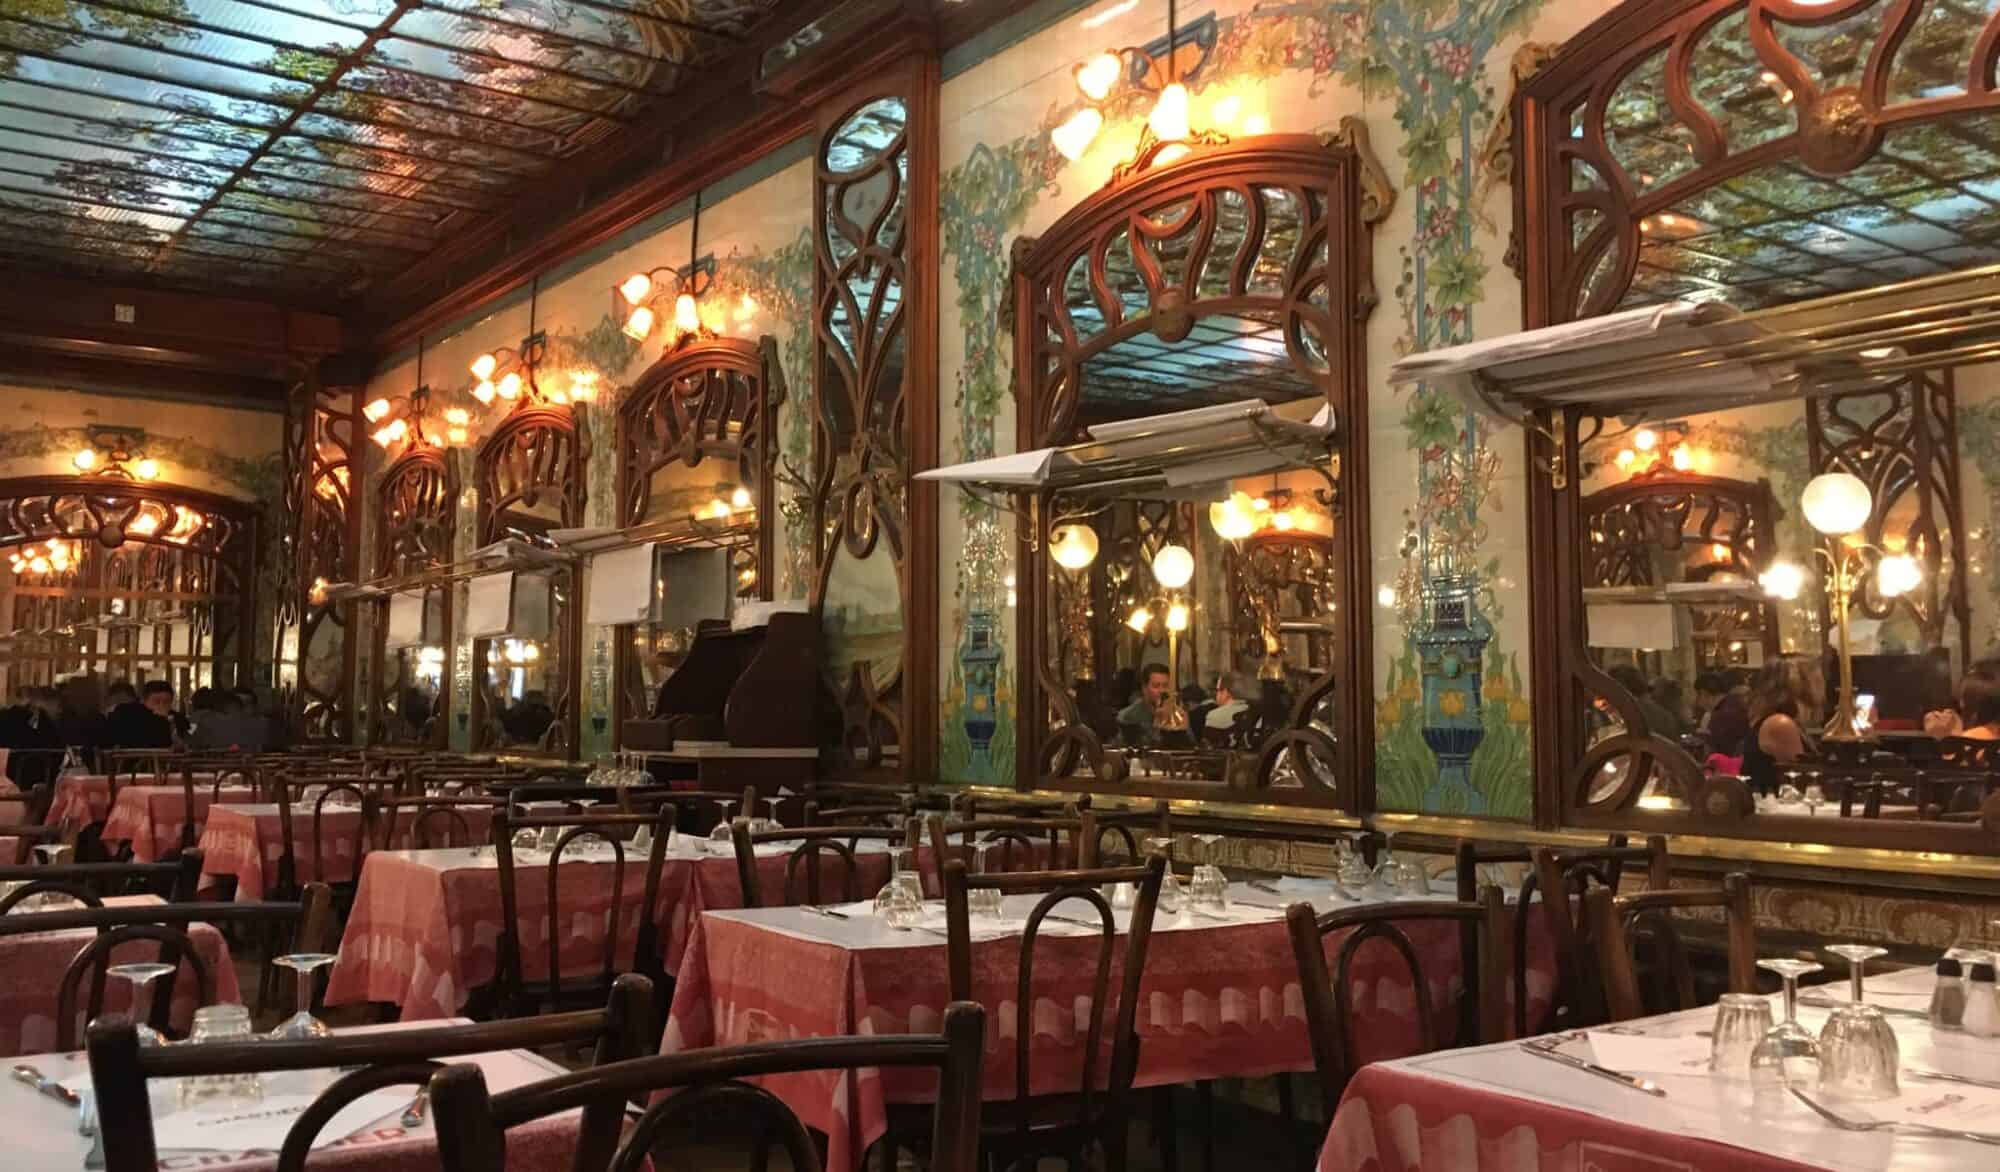 The opulent dining room of Bouillon Chartier Montparnasse with high, stained glass ceilings, wood panelling, ornate wood framed mirrors surrounded by painted tiles and tables with table cloths covered by white paper.